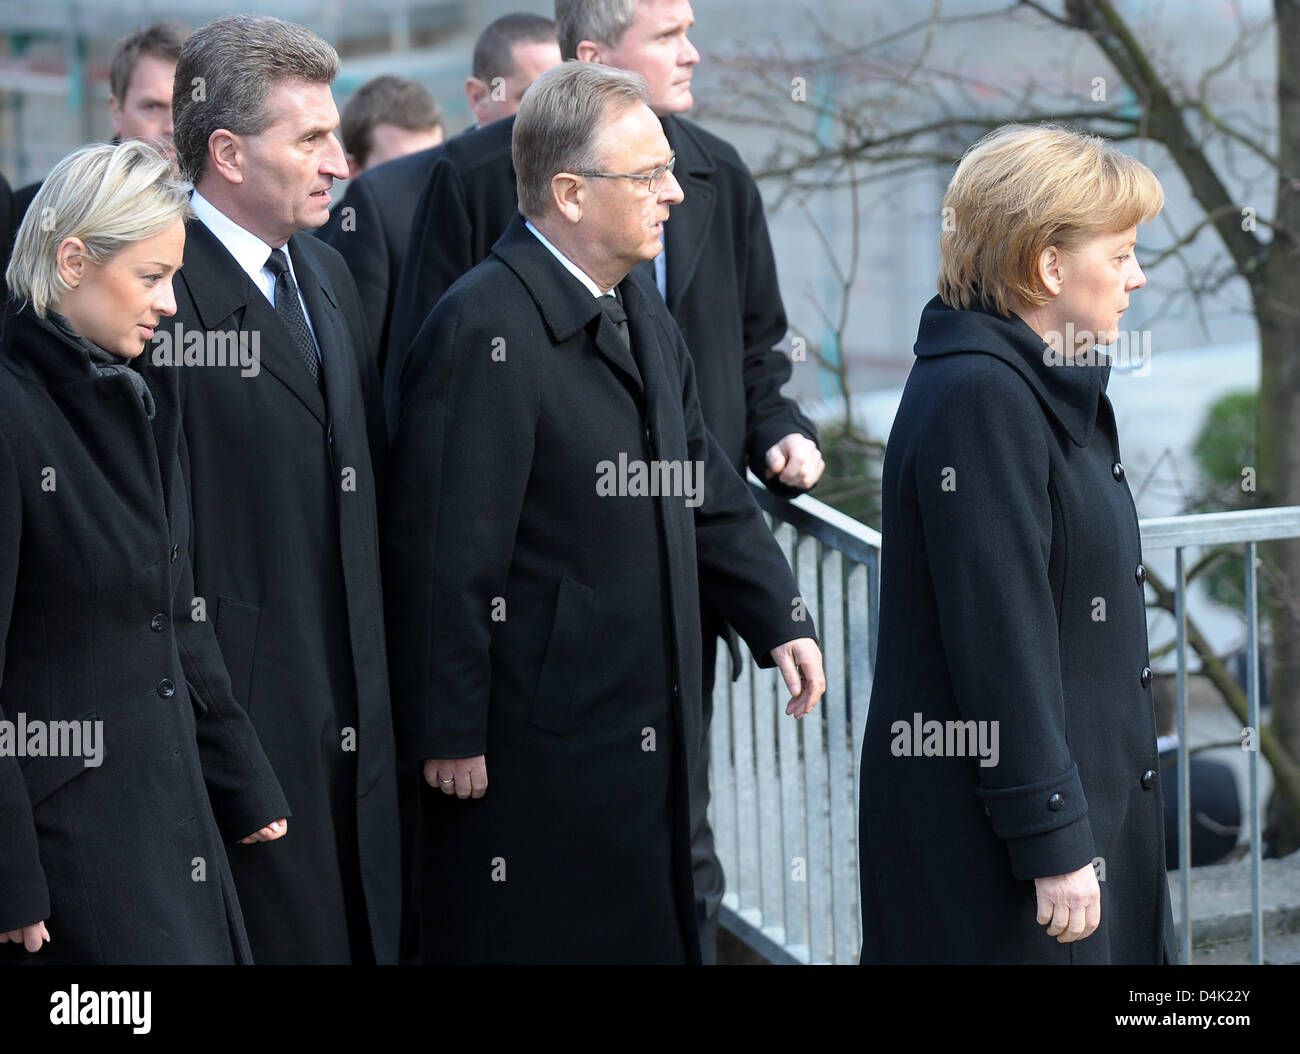 German Chancellor Angela Merkel (R), the Prime Minister of Baden-Wuertemmberg Baden-Württemberg, Guenther Oettinger (2-L) his partner Friederike Beyer (L) and the President of the Federal Constitutional Court, Hans-Juergen Papier (2-R) arrive for the official memorial service at St. Karl Borromaeus Church in Winnenden, Germany, 21 March 2009. Mourners commemorated the 15 vicitims k Stock Photo